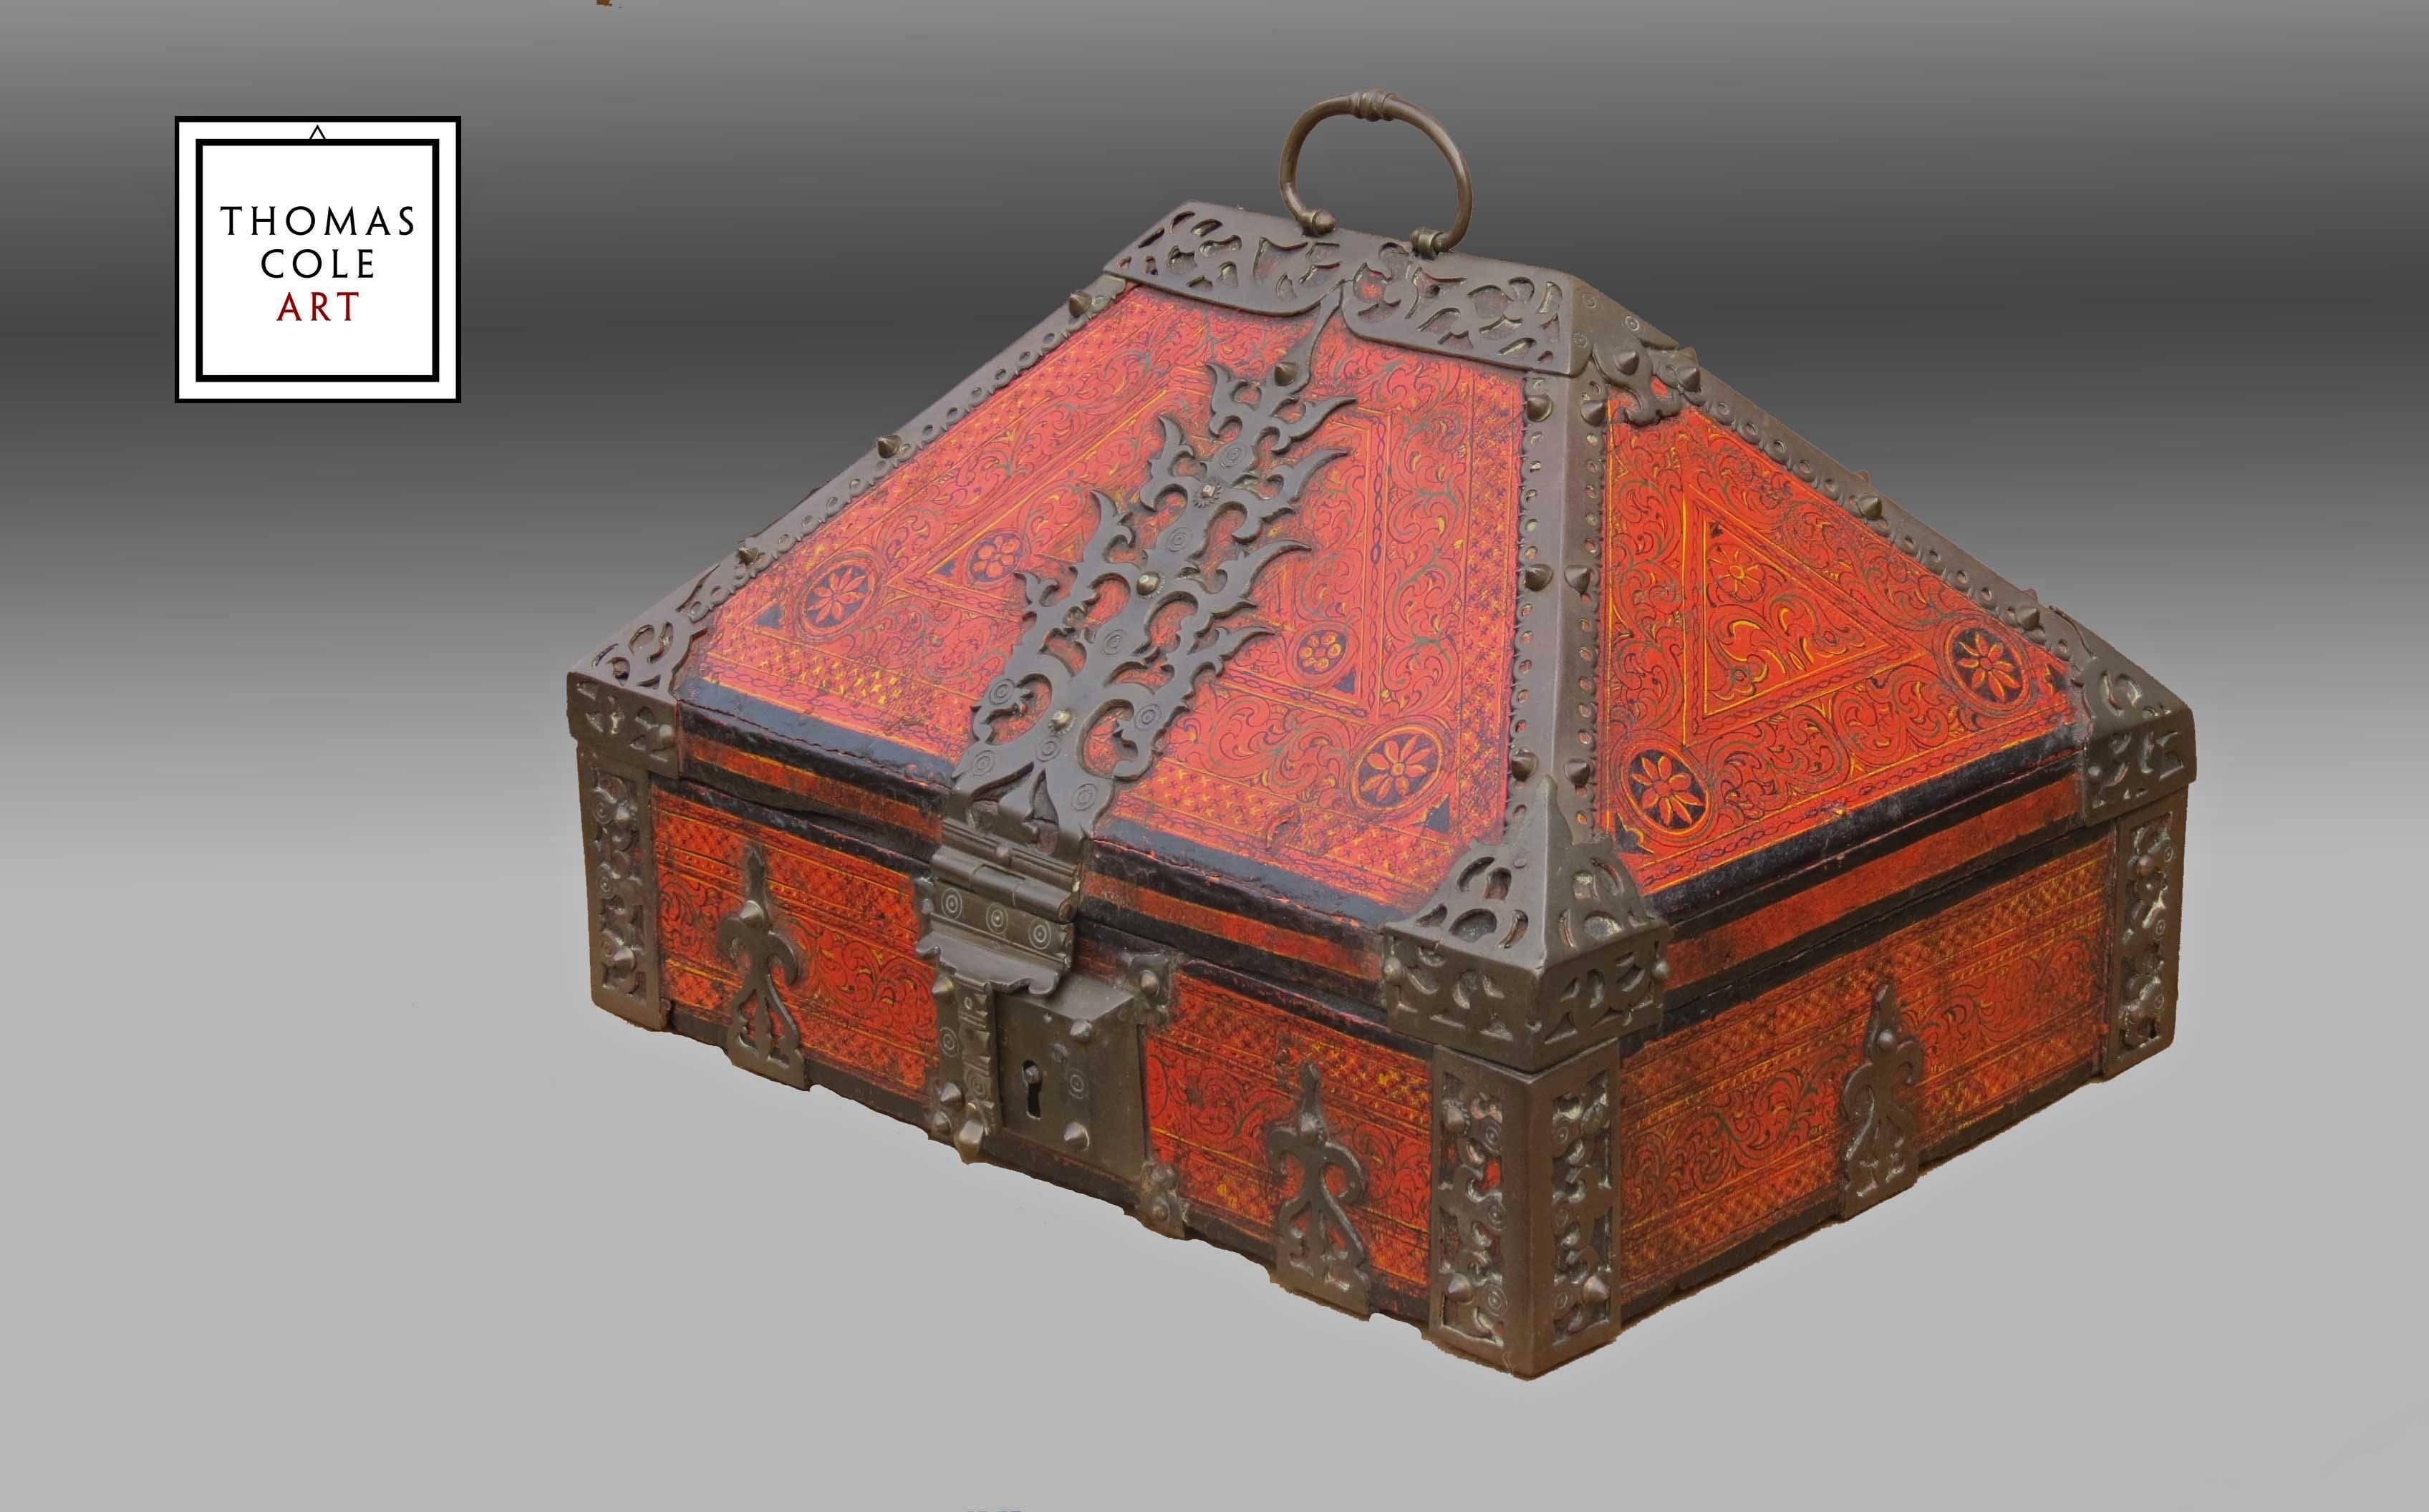 A jewelry box with antique iron decorations (and hinges) of fine jack wood by the ancient carpenters of ancient Kerala.. Boxes of this style are known as “Malabar boxes” or nettur boxes in Kerala. Lacquer and oil painted designs cover the